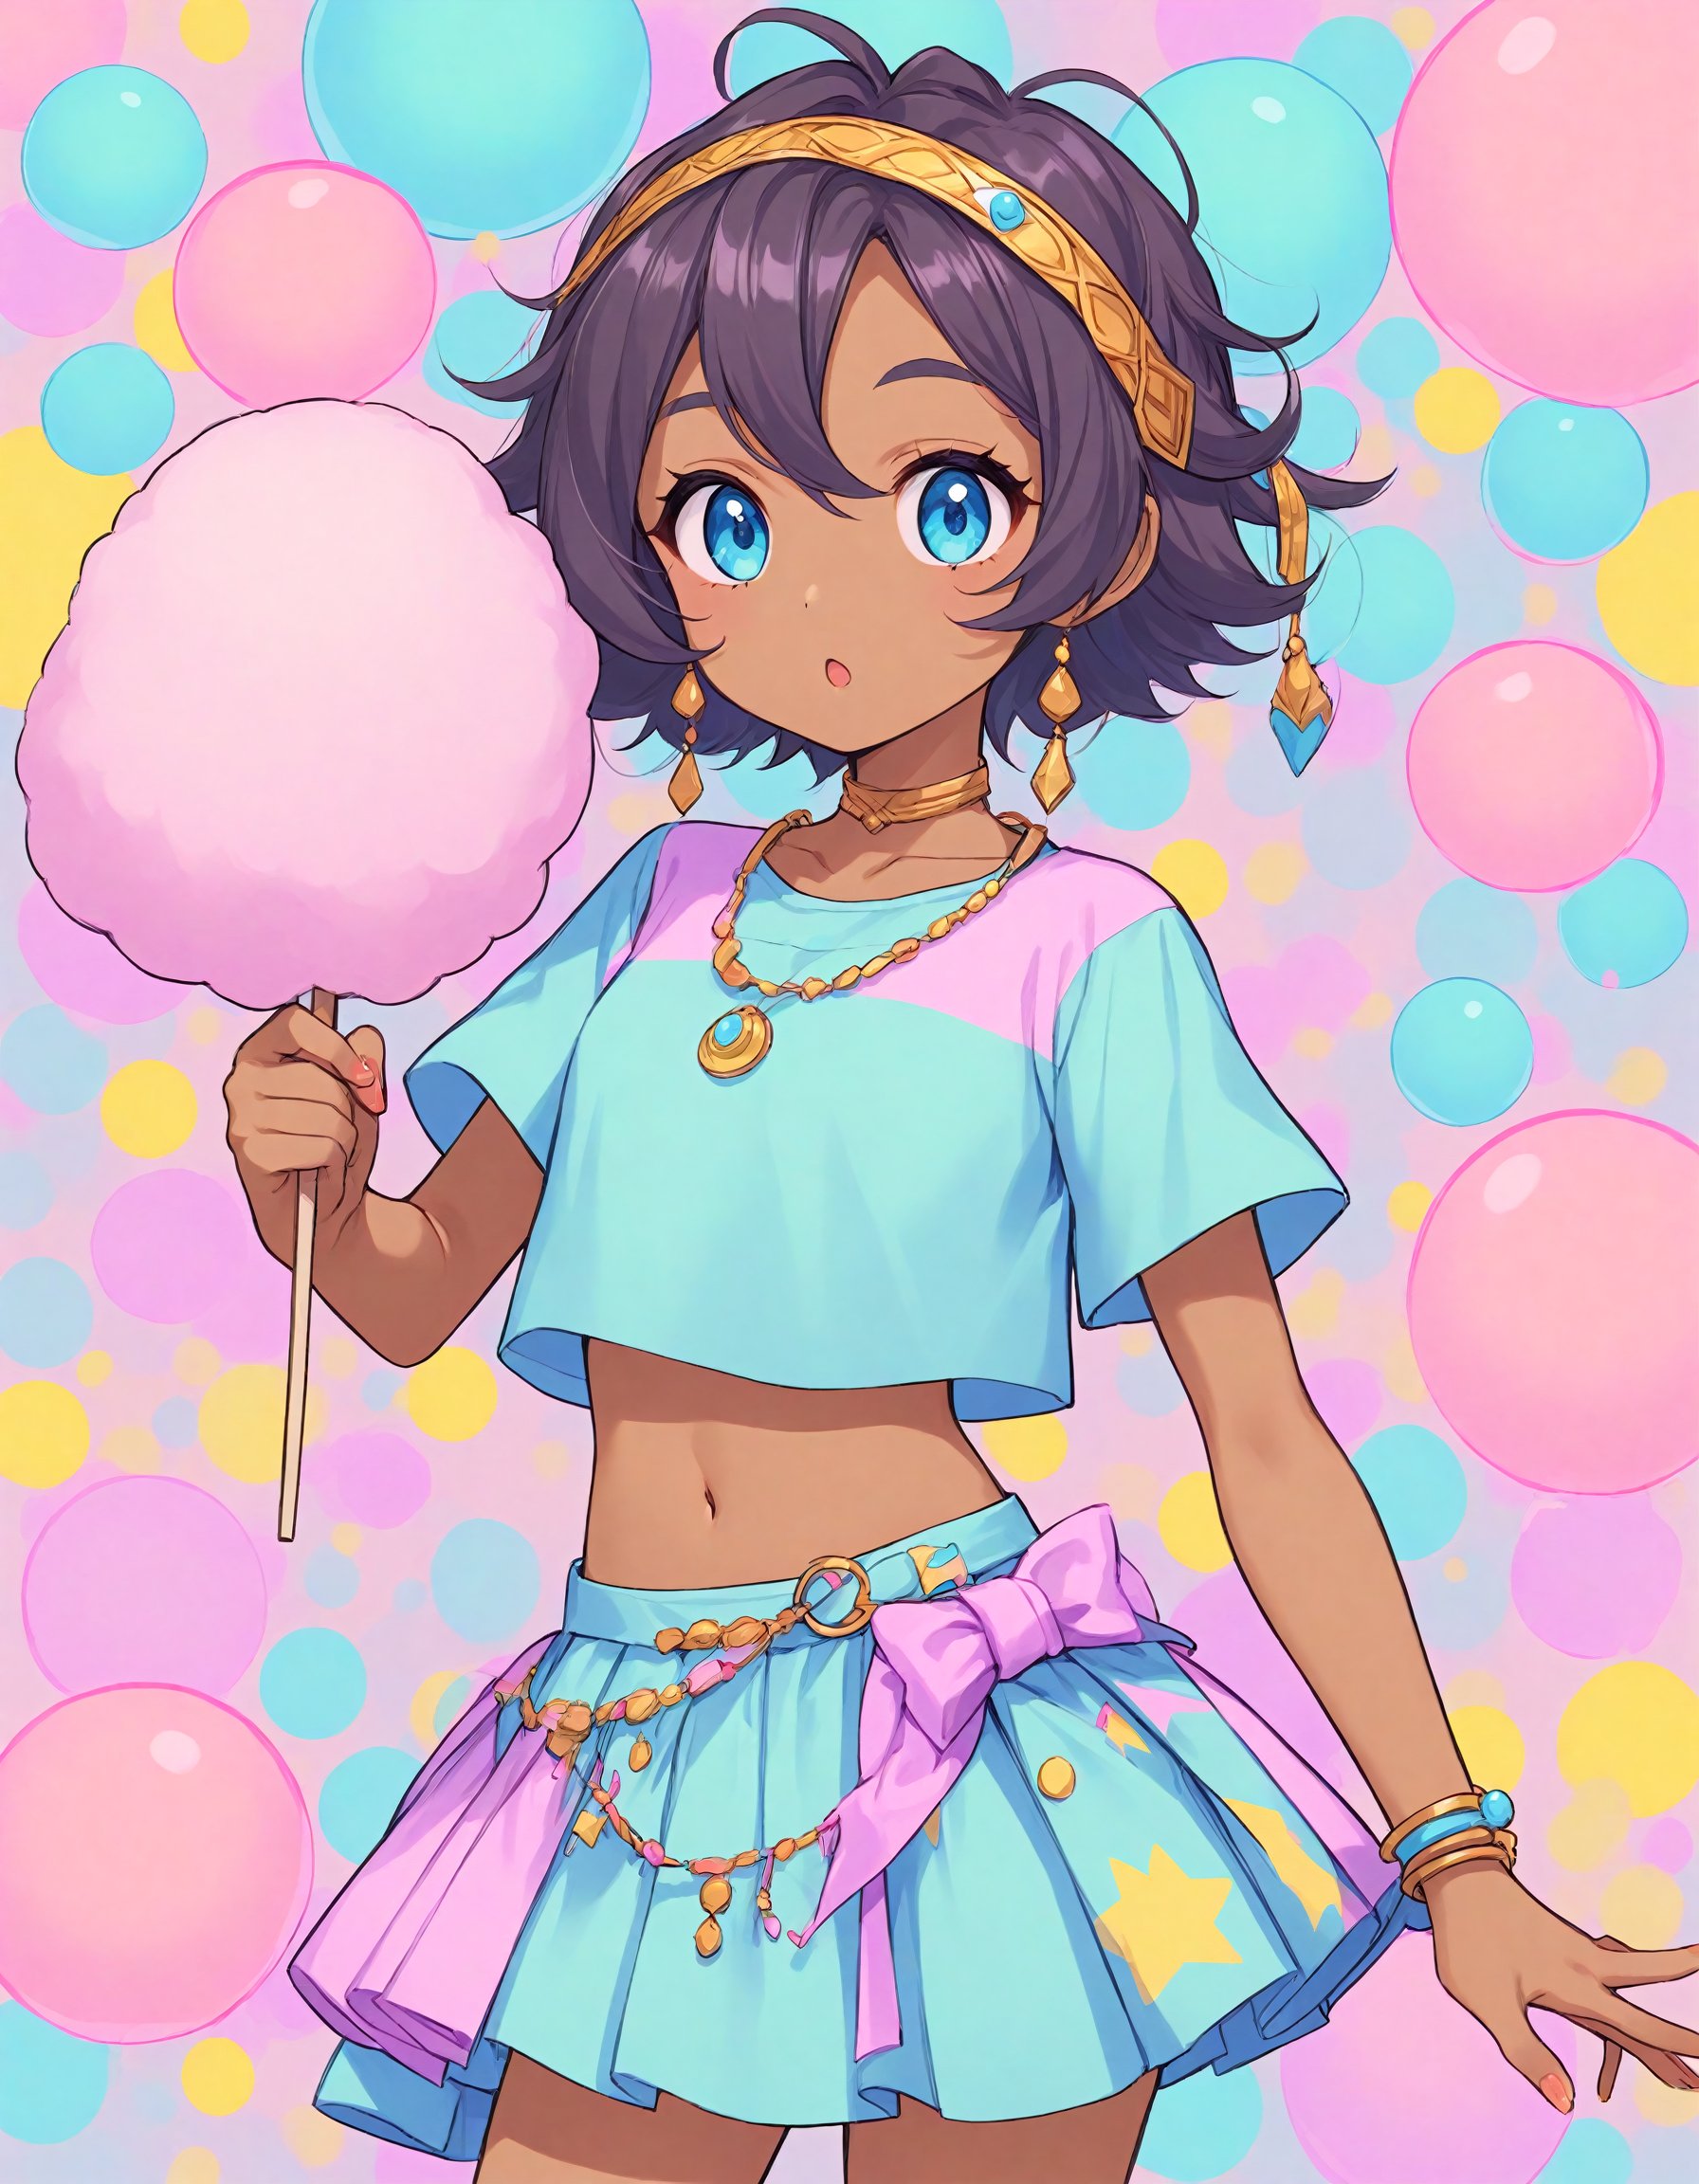 (pretty elegant taliyah), croptop Tshirt and skirt, bubbles and cotton candy colors